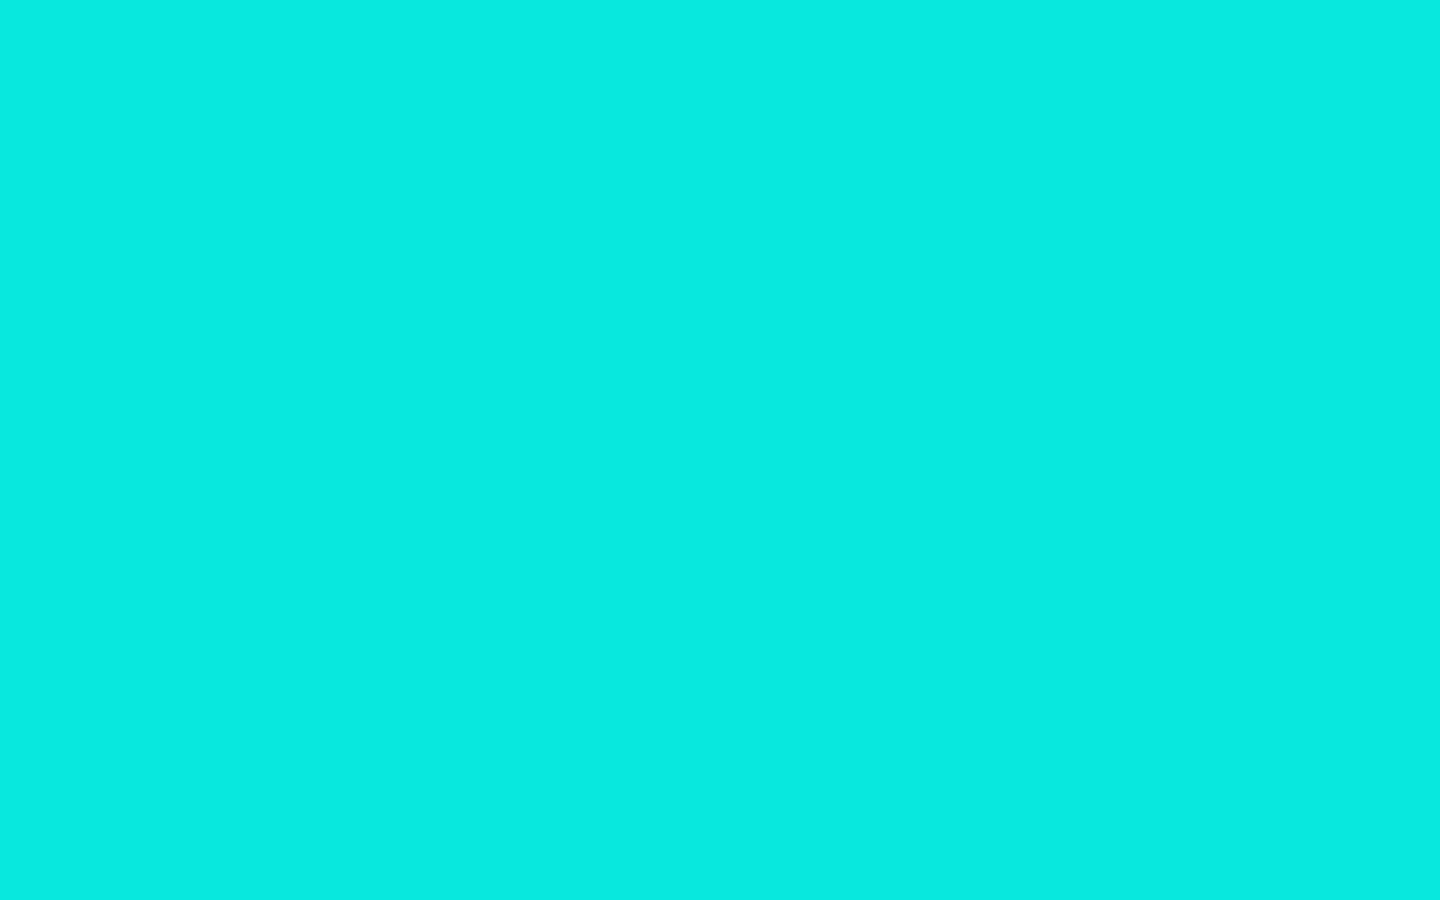 1440x900-bright-turquoise-solid-color-background.jpg